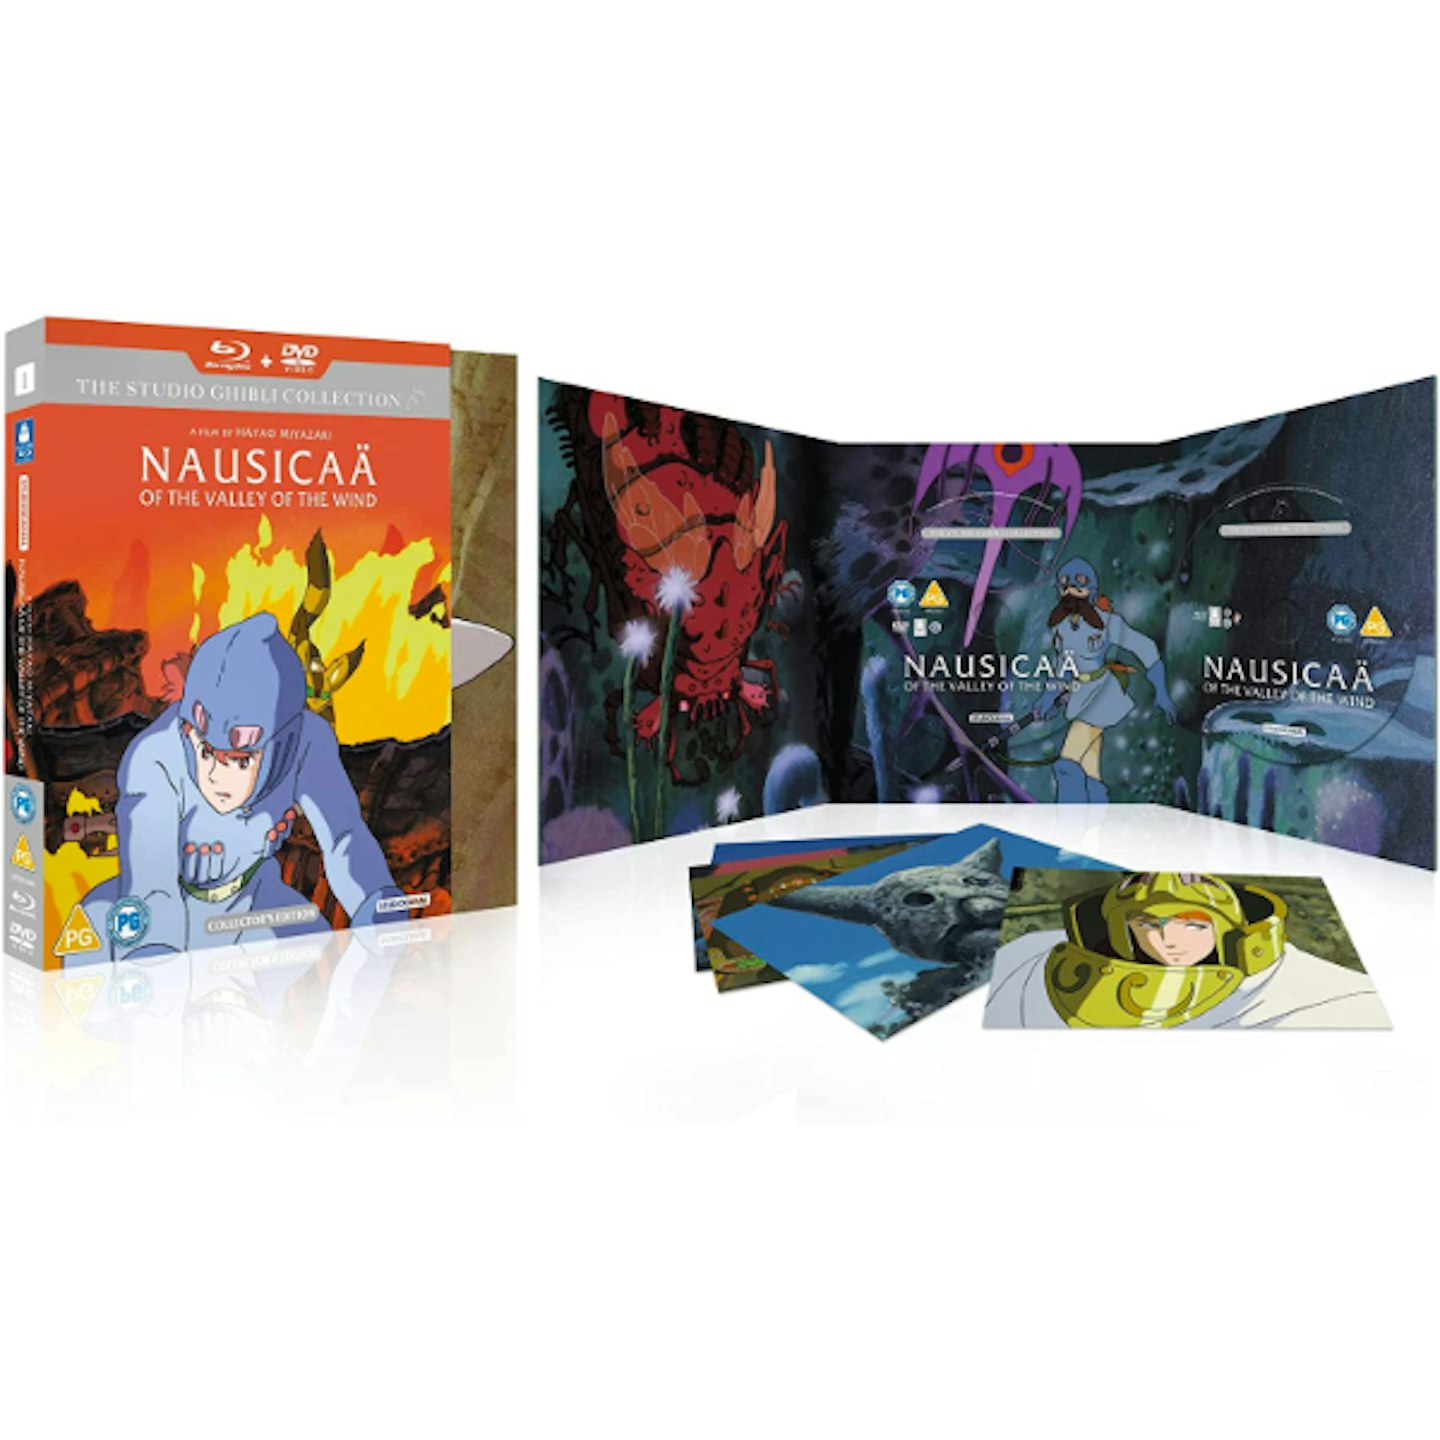 Nausicau00e4 of the Valley of the Wind Collector's Edition